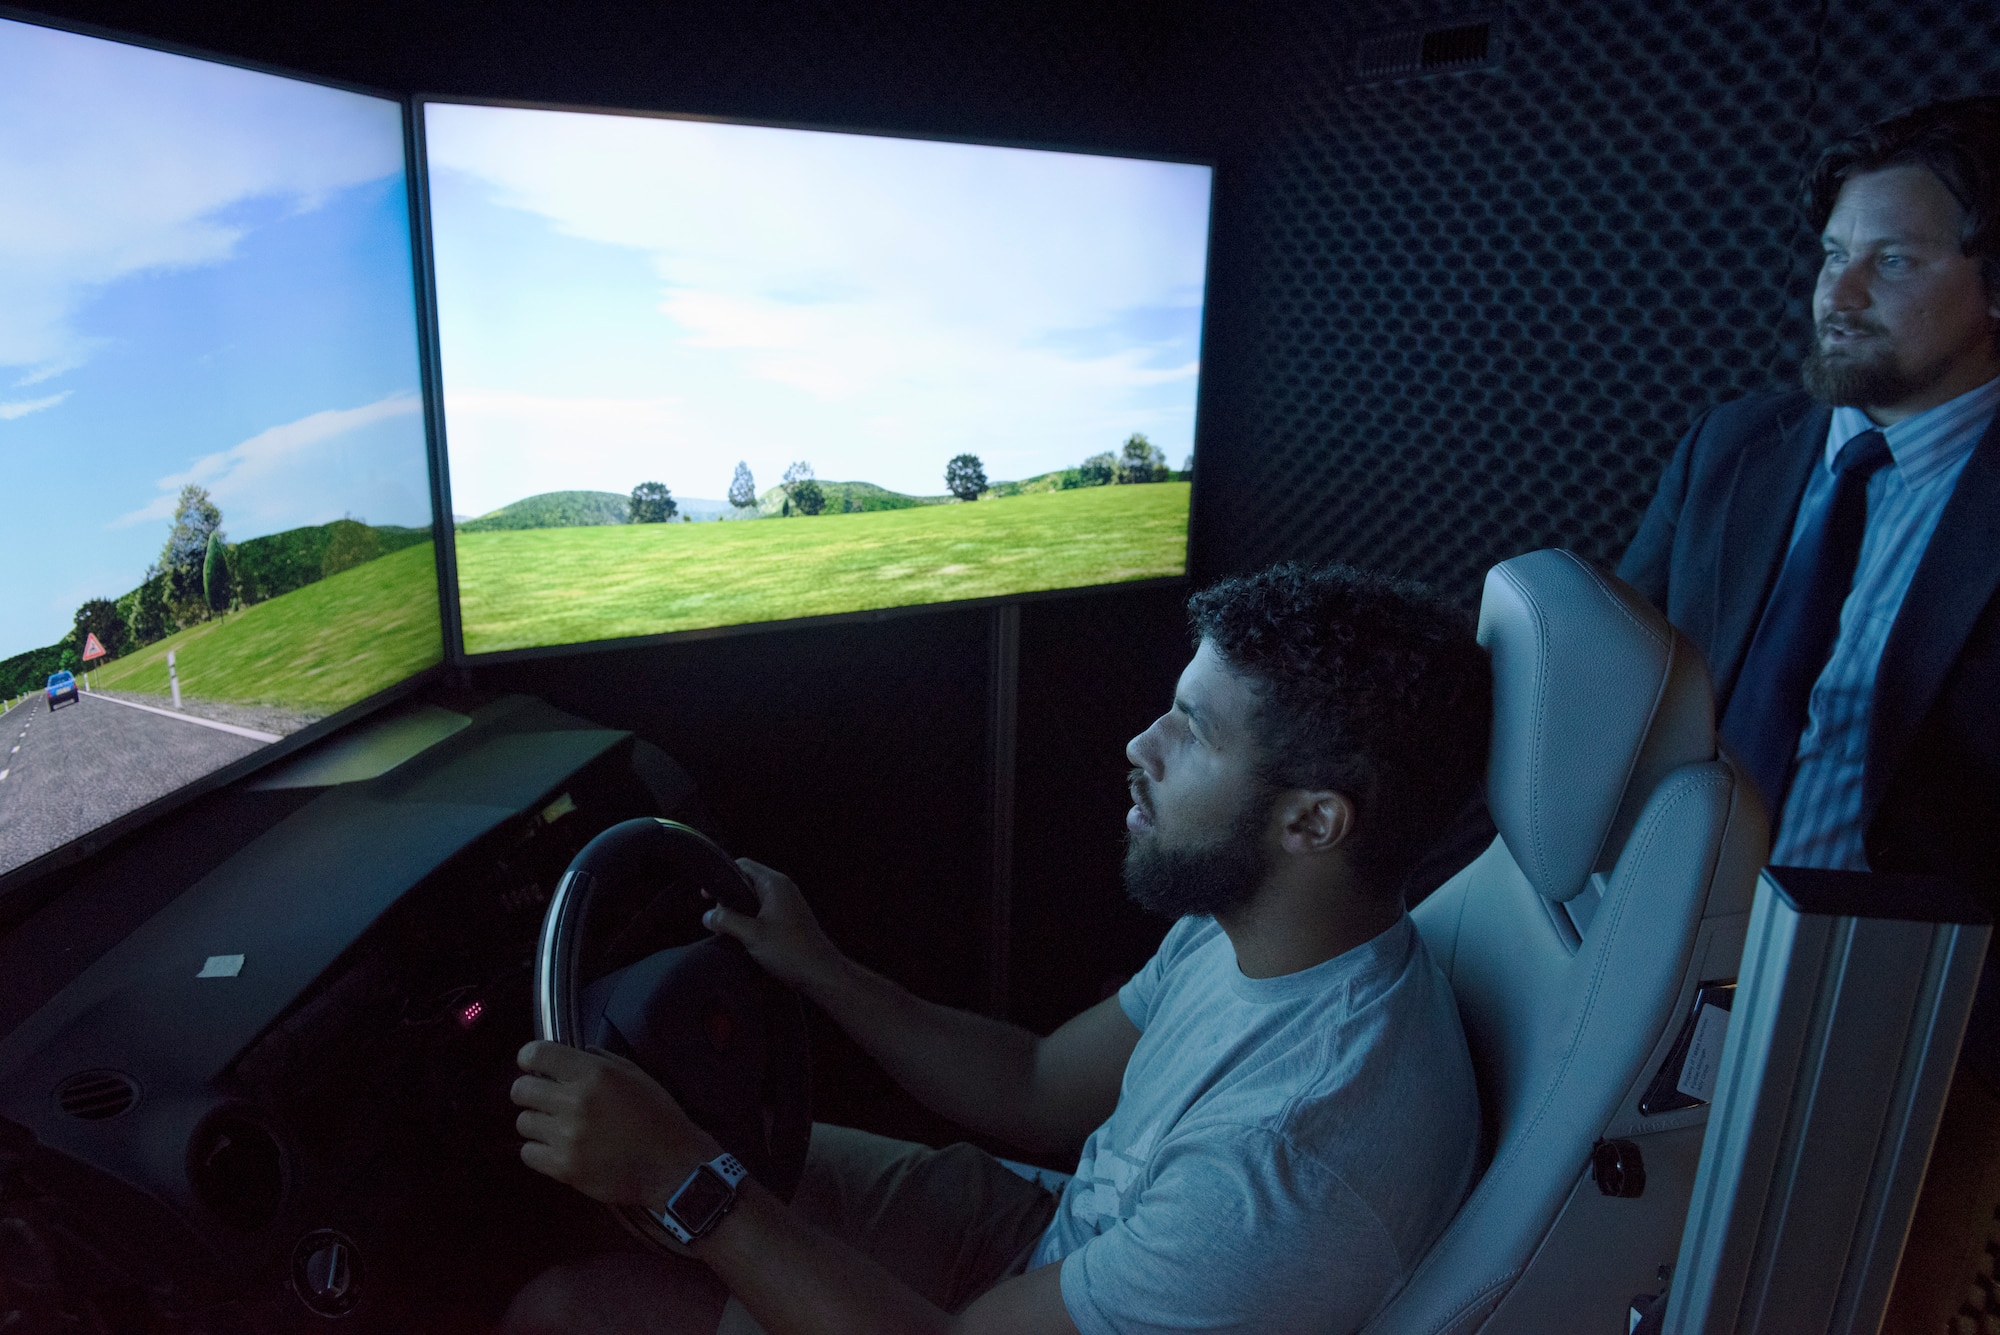 NASCAR driver Darrell “Bubba” Wallace Jr., test drives a simulated vehicle inside the biomedical research lab at the U.S. Air Force School of Aerospace Medicine, Wright-Patterson Air Force Base, Ohio, Sept. 7, 2018. The research is used for assessing aircrew fatigue and system performance. (U.S. Air Force photo by Michelle Gigante)